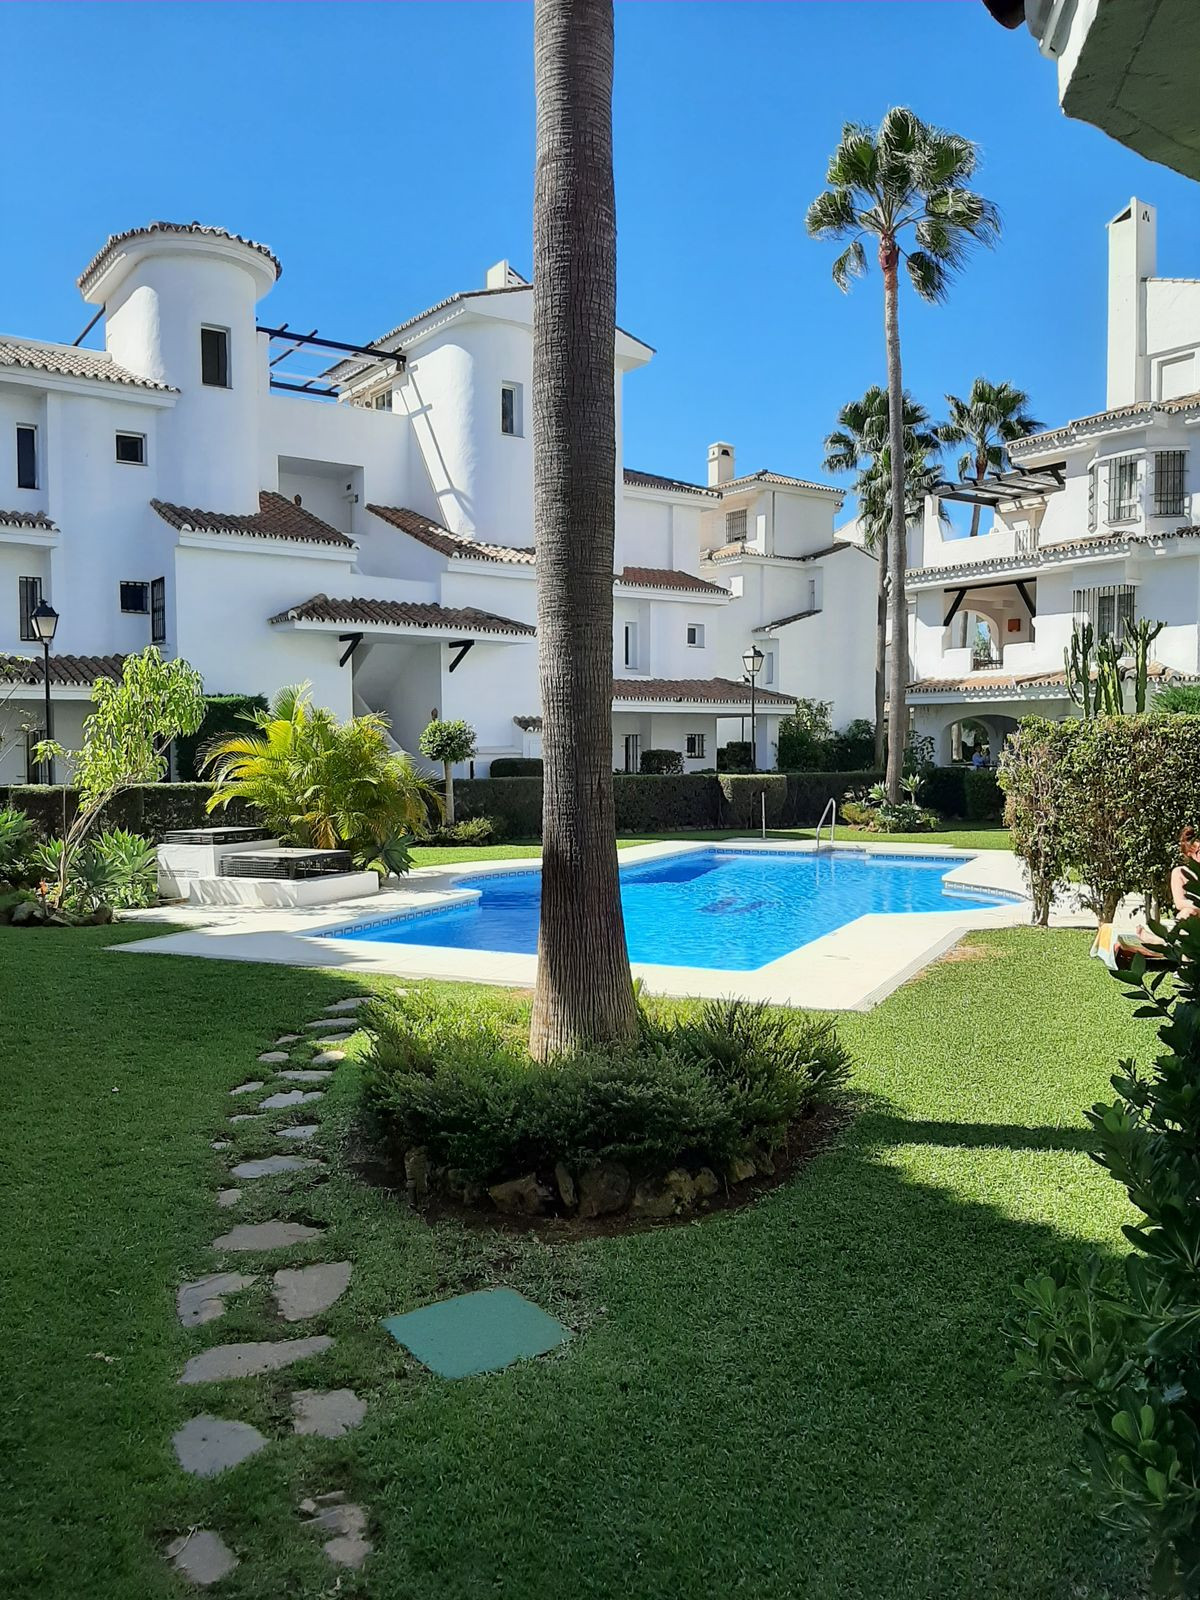 						Apartment  Ground Floor
													for sale 
																			 in Nueva Andalucía
					